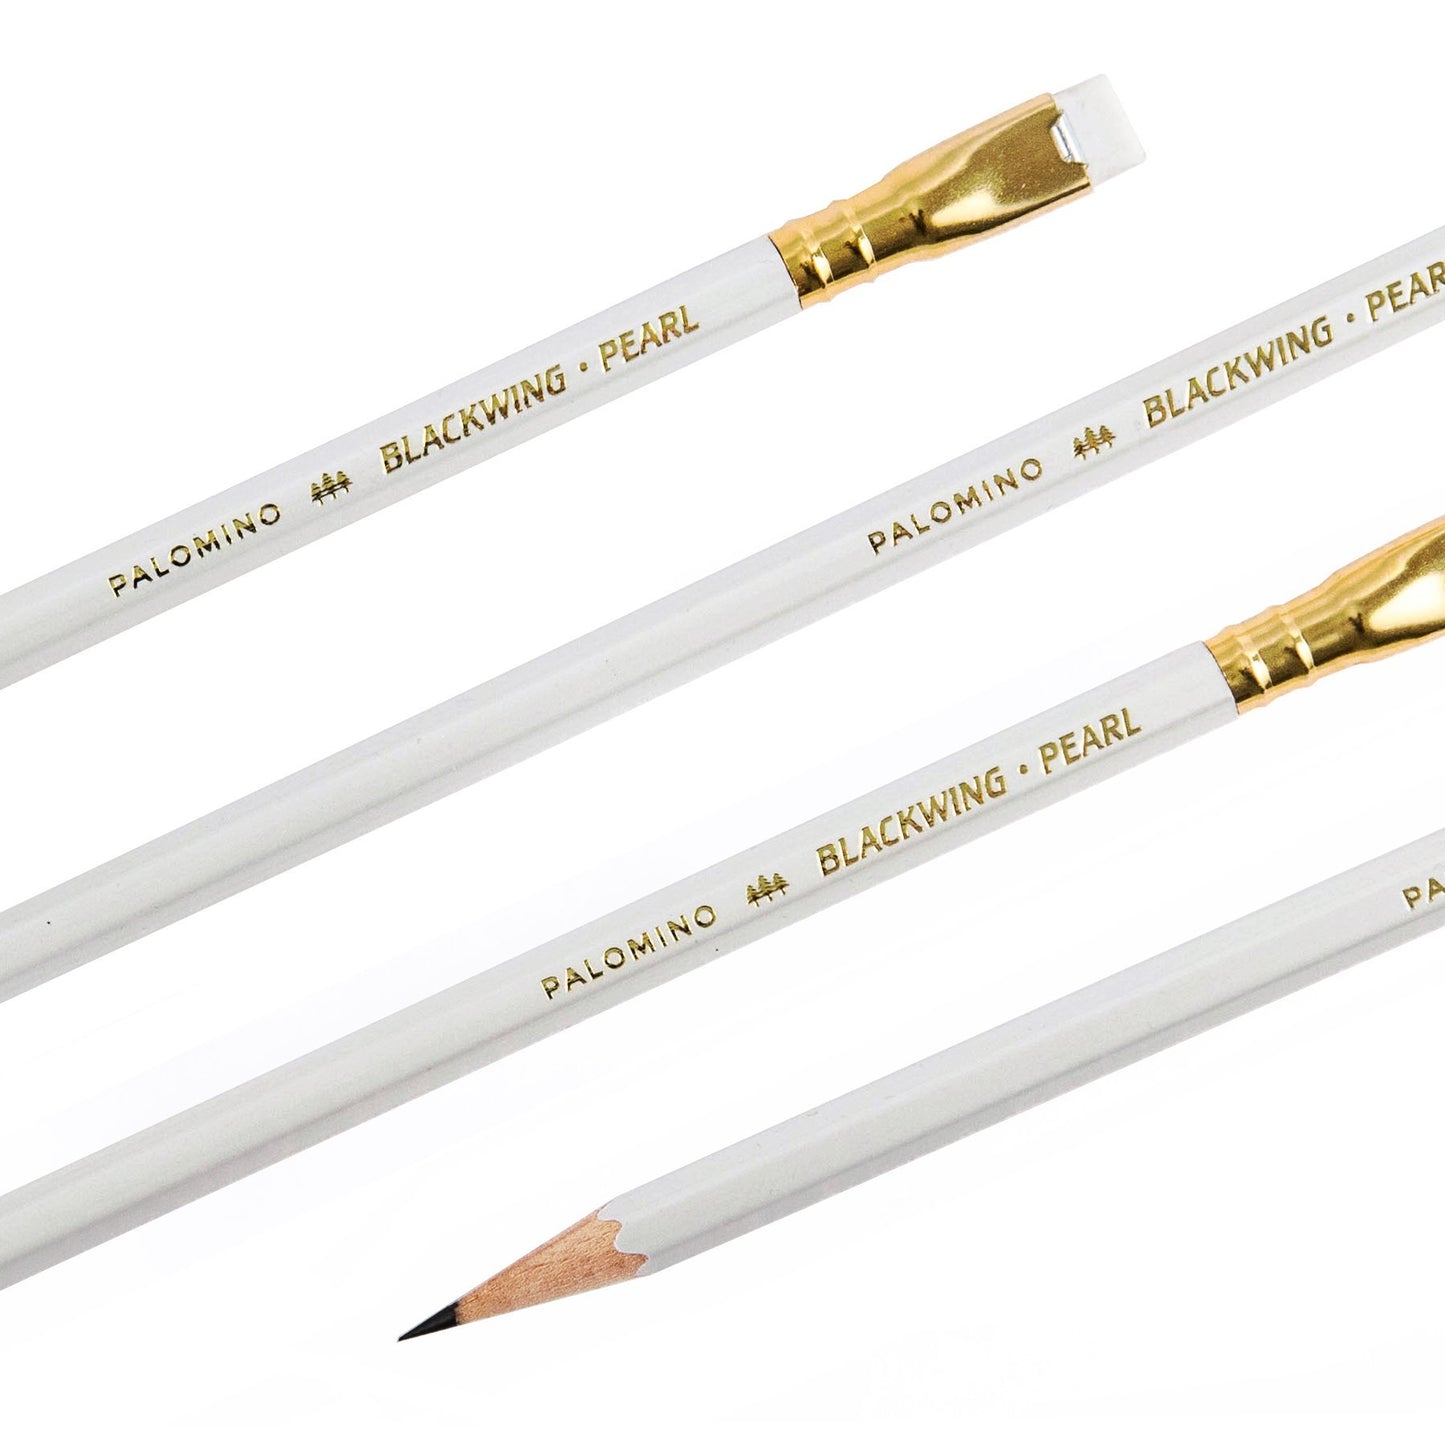 BLACKWING PEARL - conf. 12 matite